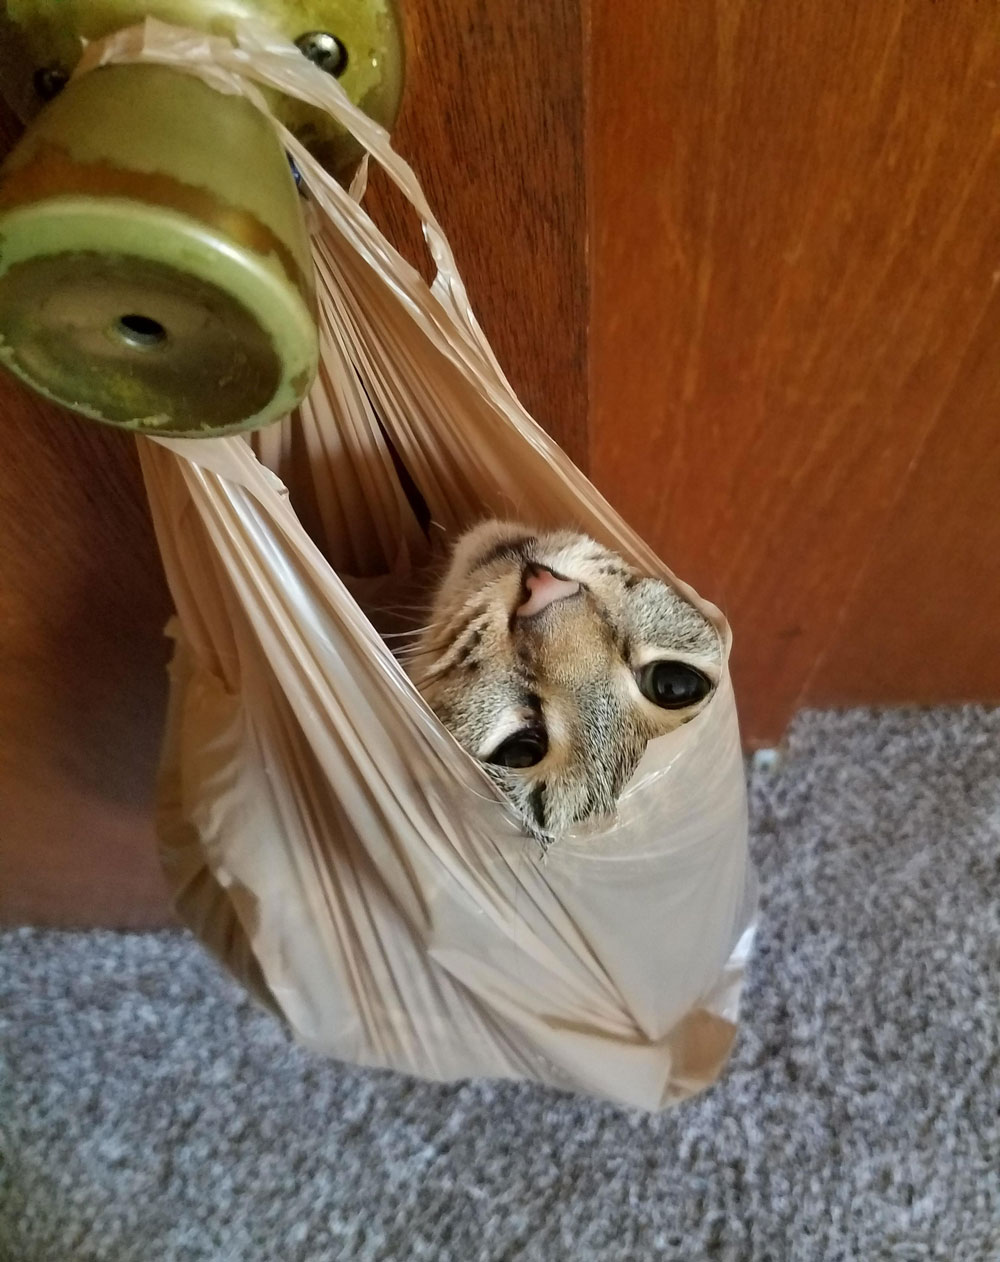 My cat likes to sleep in grocery bags hanging from doorknobs